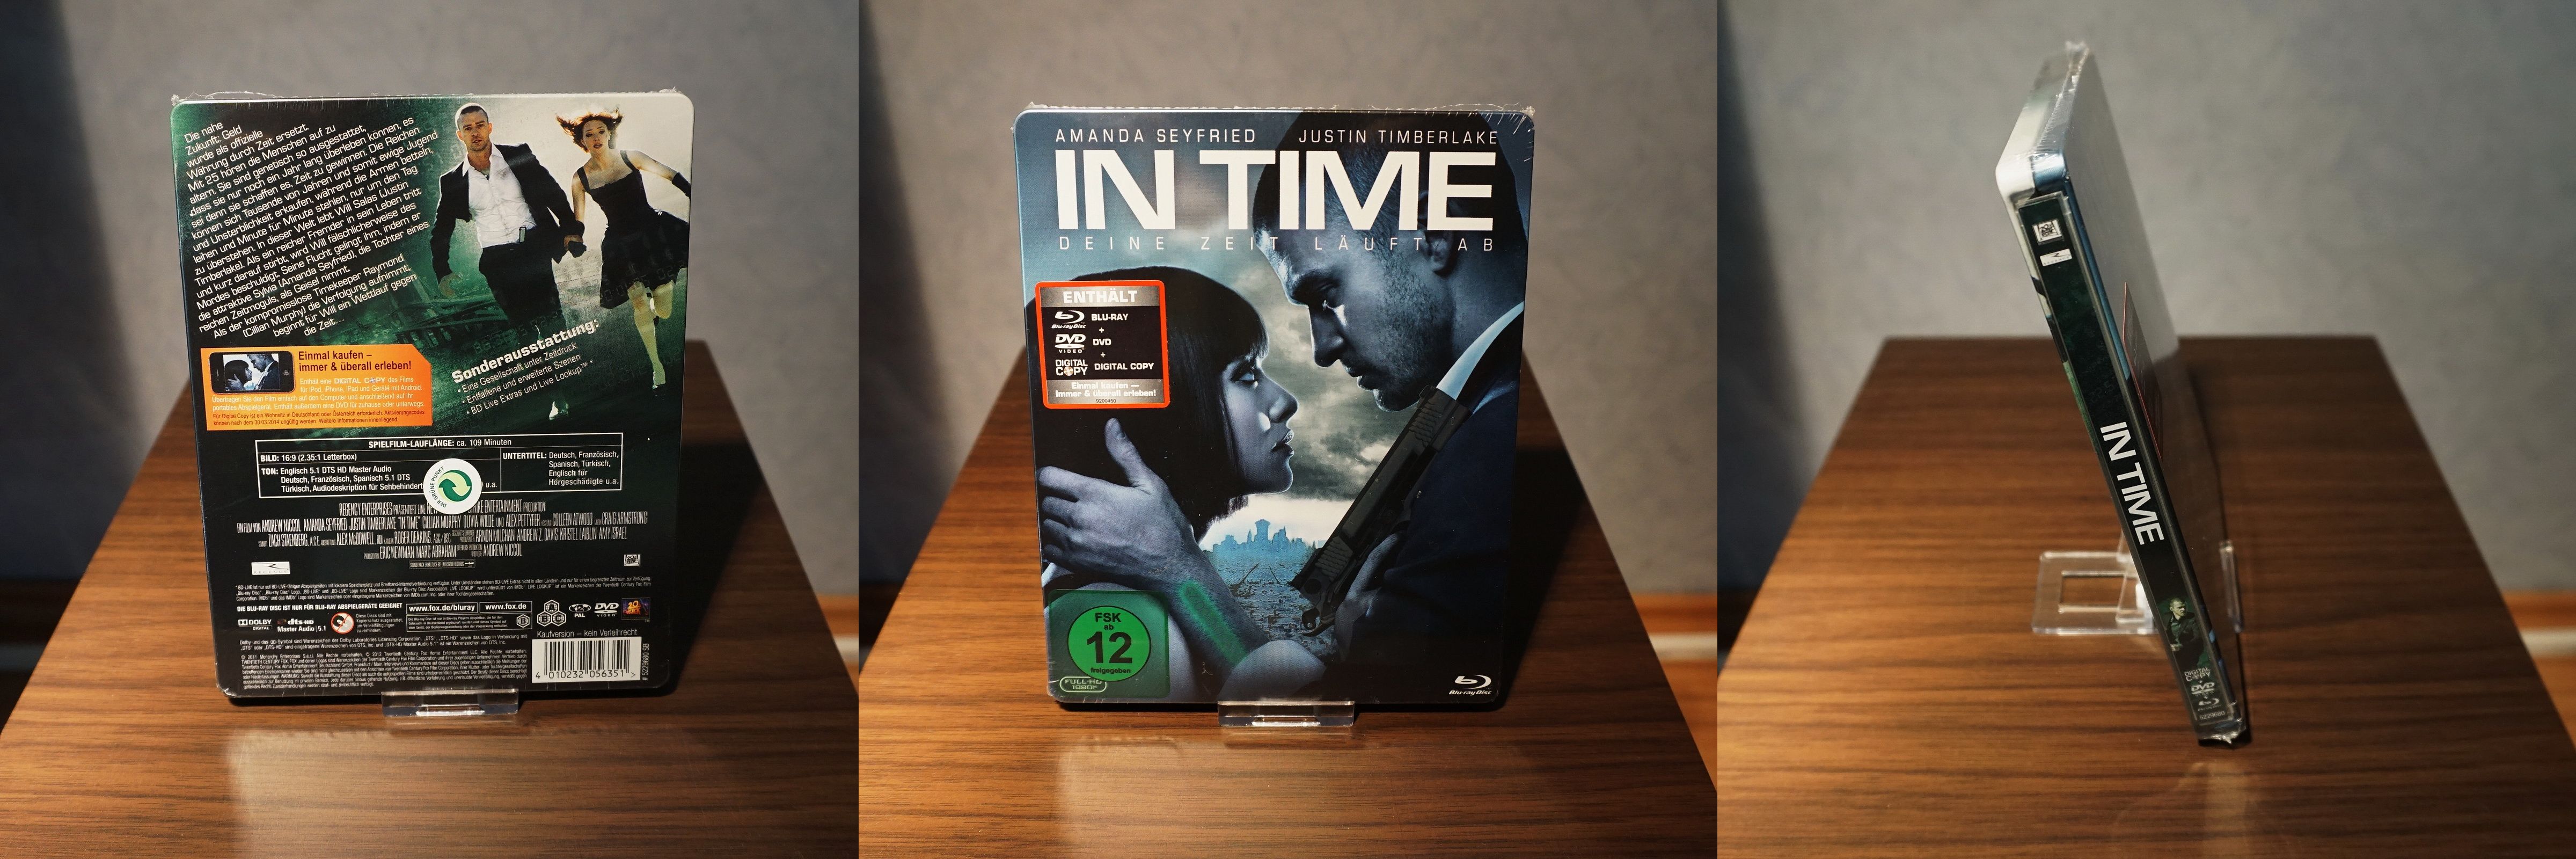 In Time Germany Media Markt Exclusive